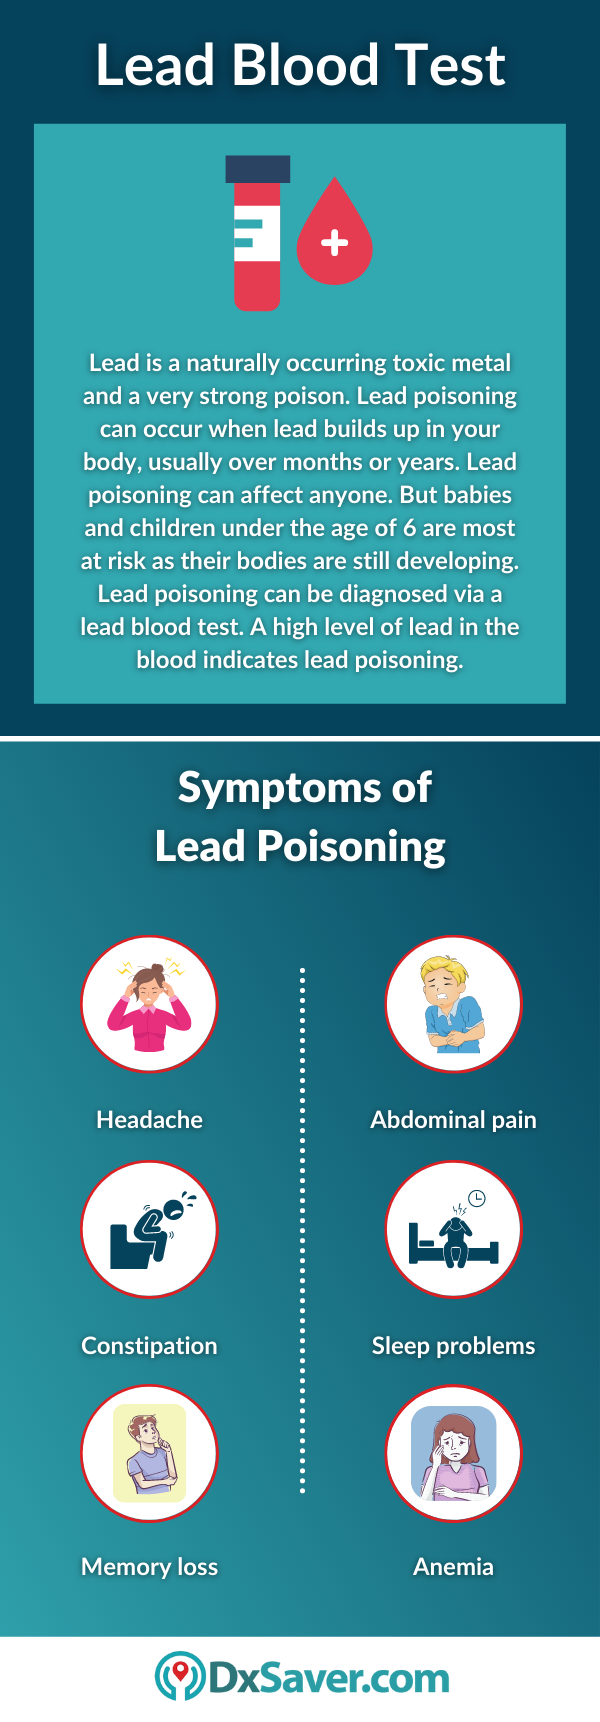 Lead Blood Test and Lead Poisoning Symptoms